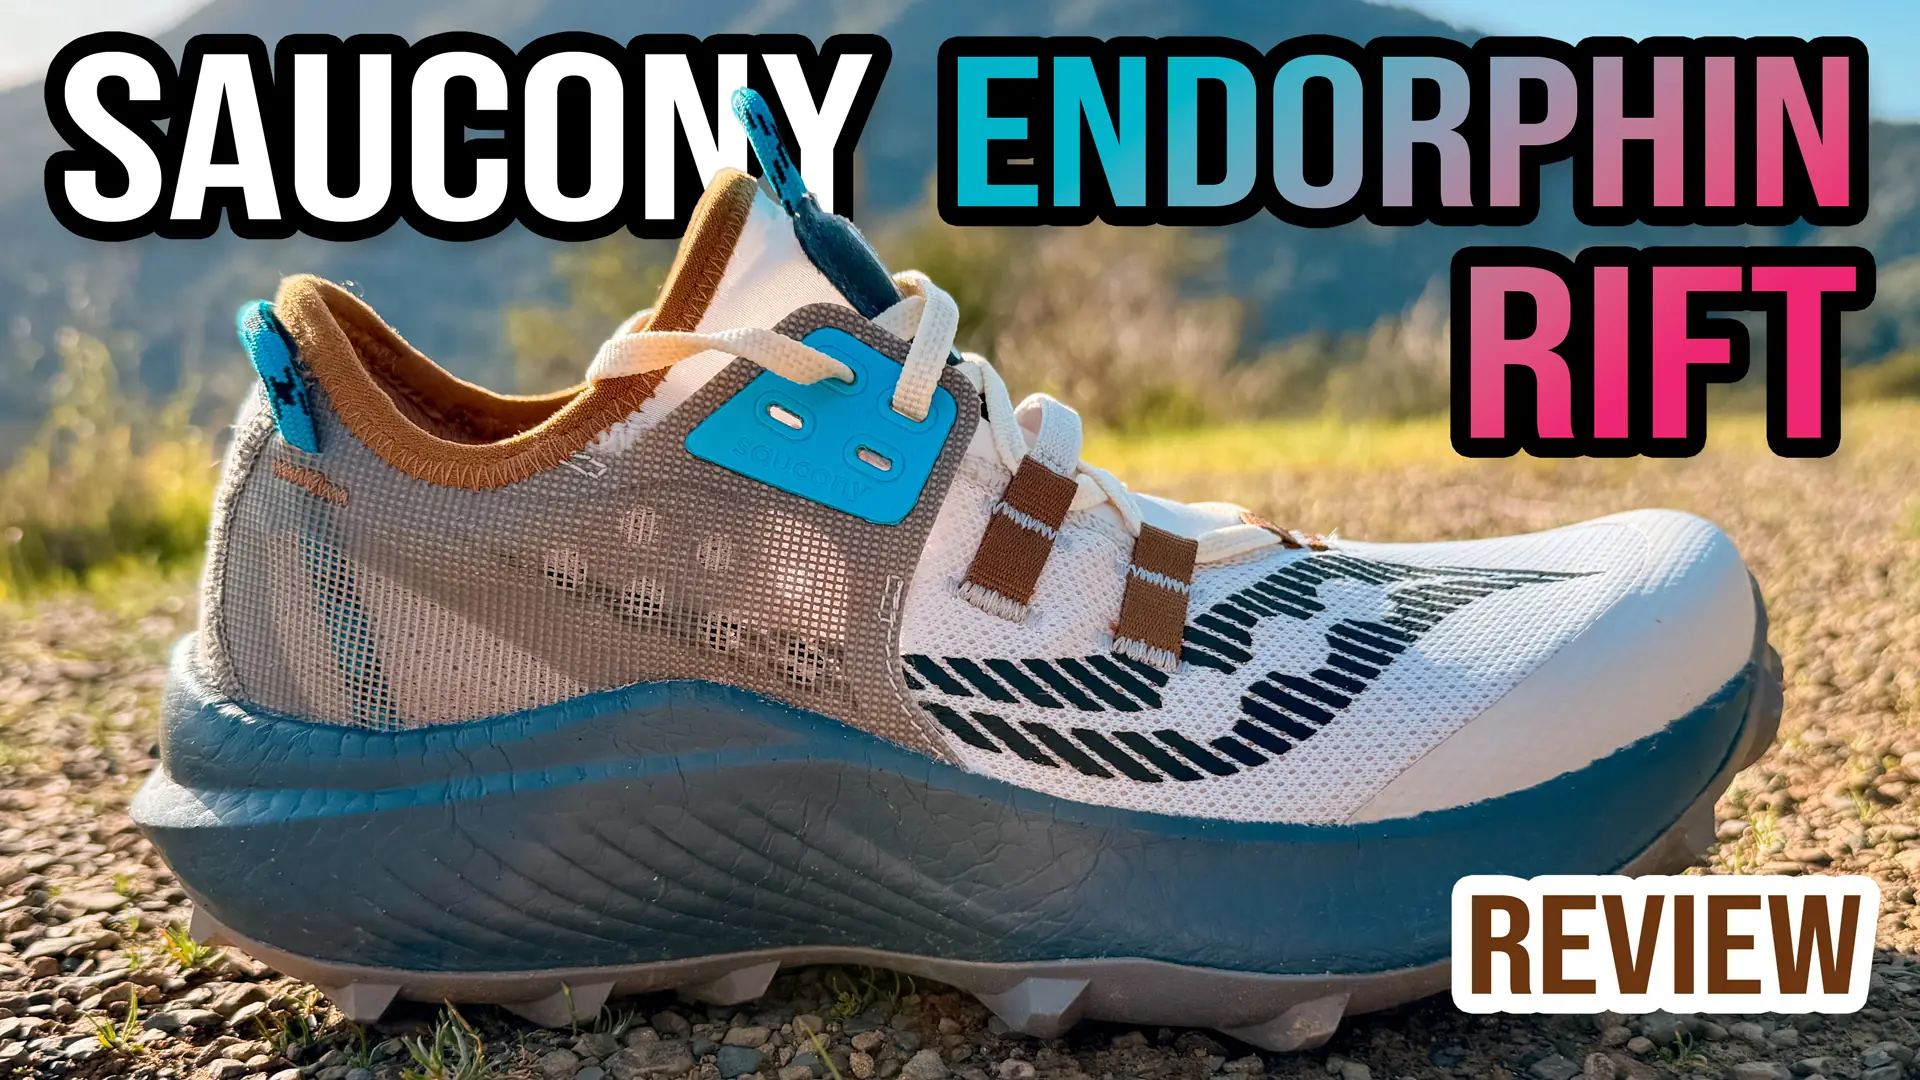 Saucony Endorphin Rift Review YOUTUBE